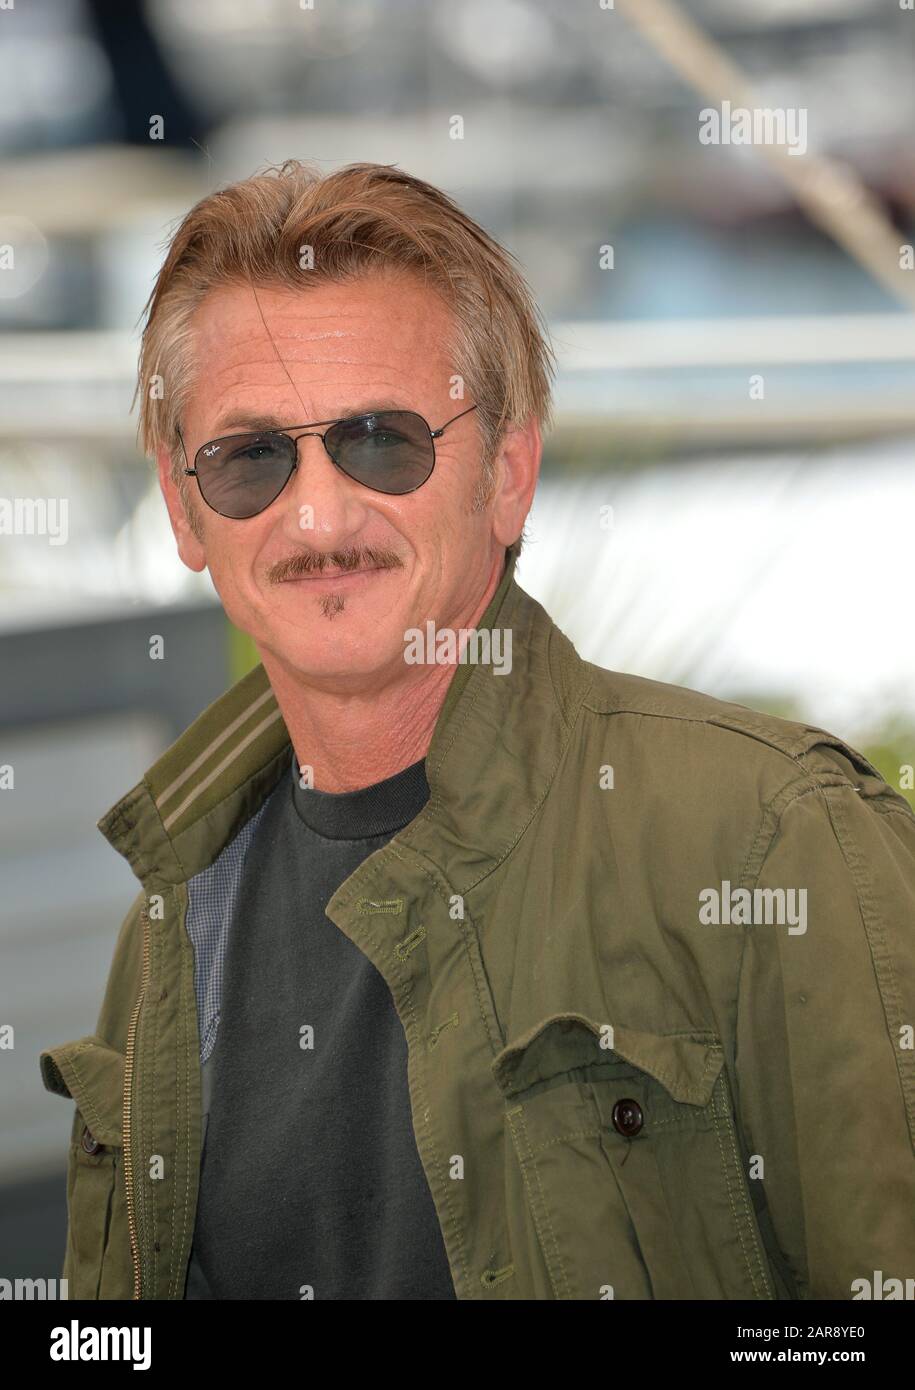 CANNES, FRANCE - MAY 20, 2016: Actor/director Sean Penn at the photocall for 'The Last Face' at the 69th Festival de Cannes. Stock Photo